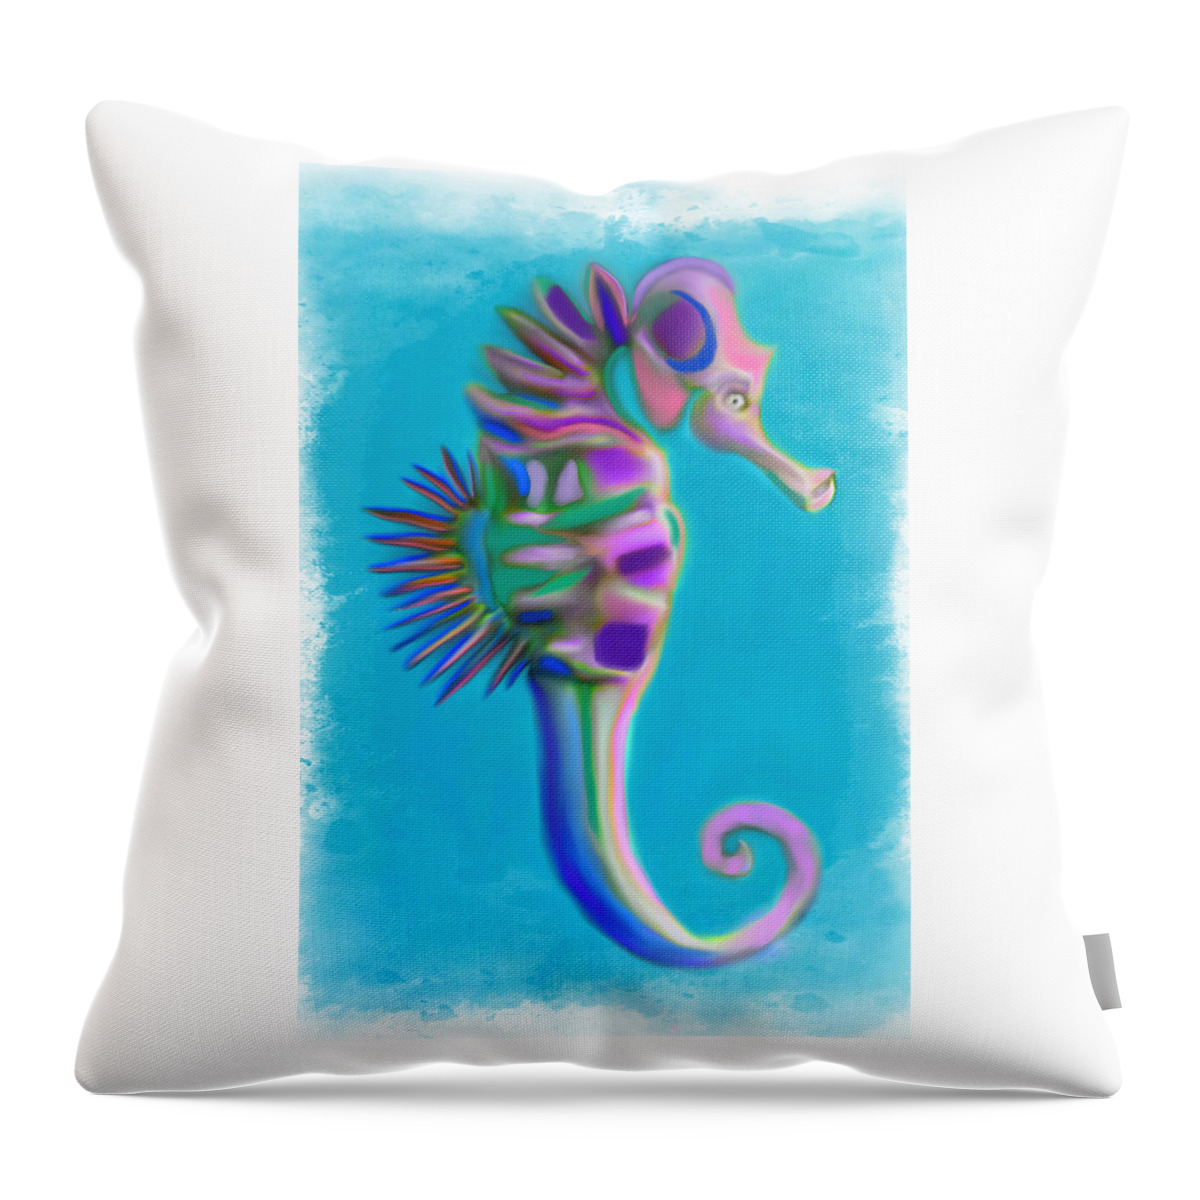 Seahorse Throw Pillow featuring the painting The Pretty Seahorse by Deborah Boyd